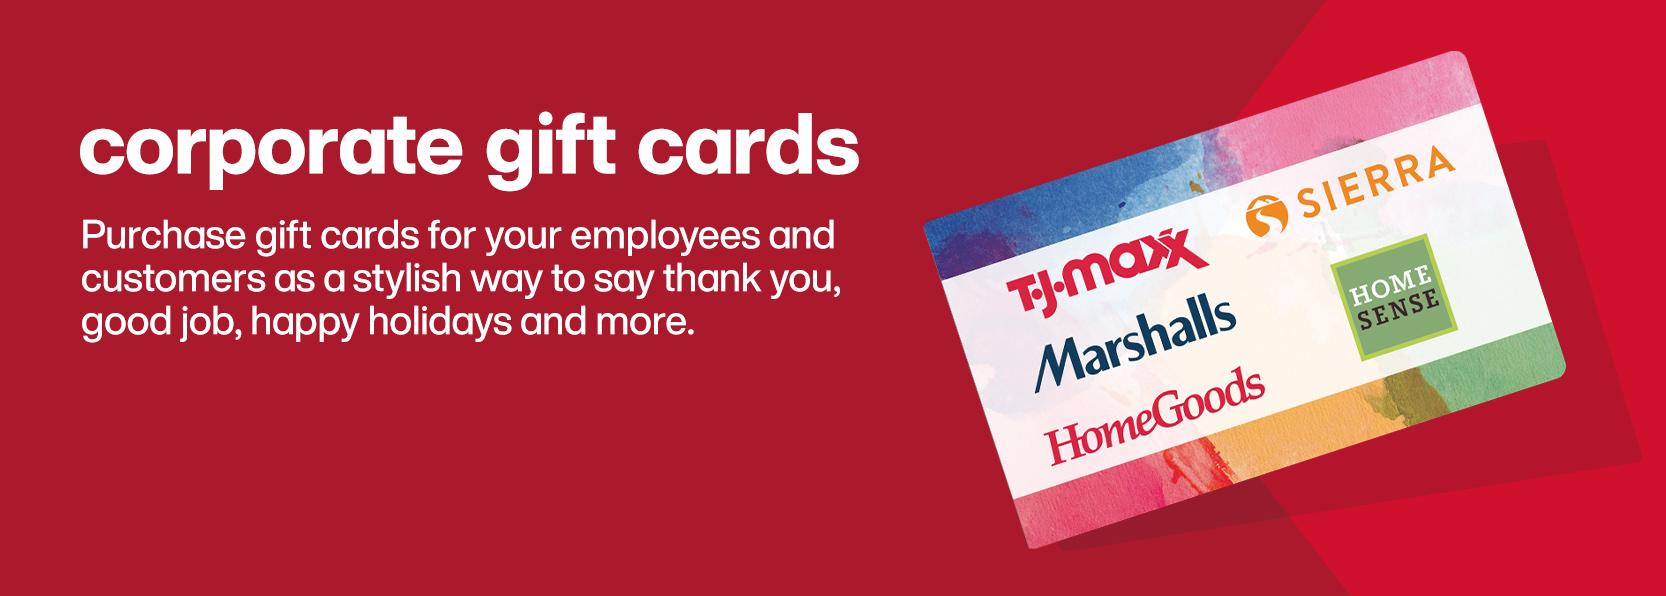 Corporate gift cards - Purchase gift cards for your employees and customers as a sylish way to say thank you, good job, happy holidays and more.